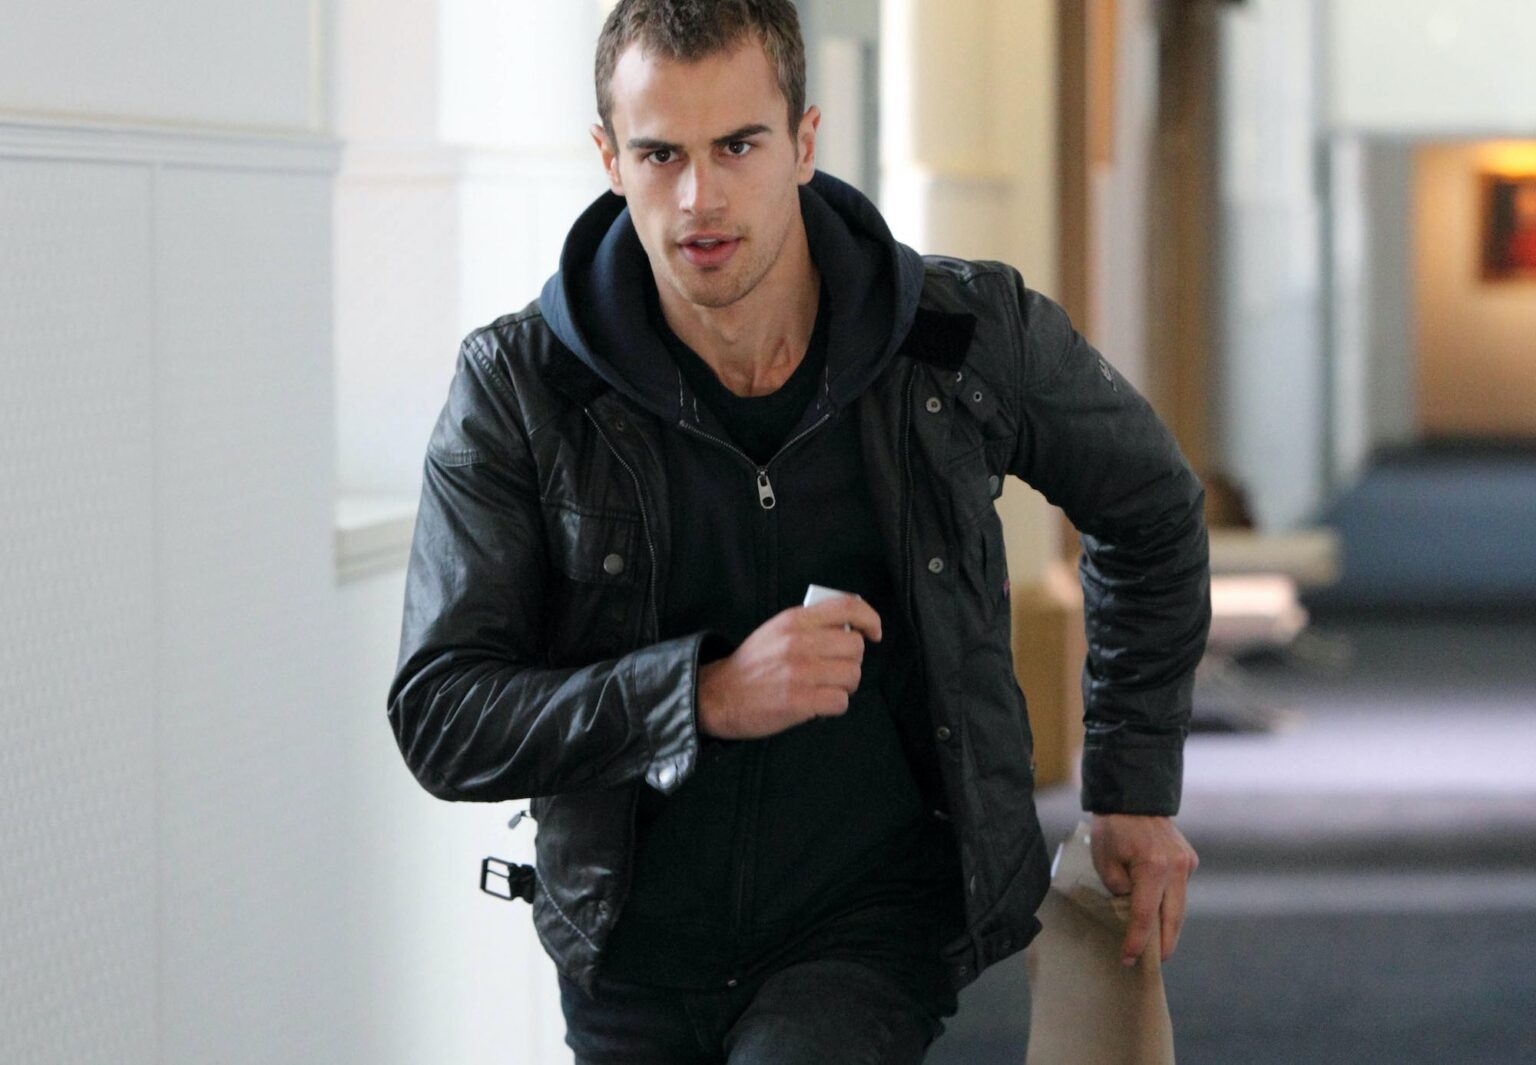 If you’re looking for more of the 'Sanditon' cast in your life, then let’s start with the leading man, Theo James. Here's where you can catch him.